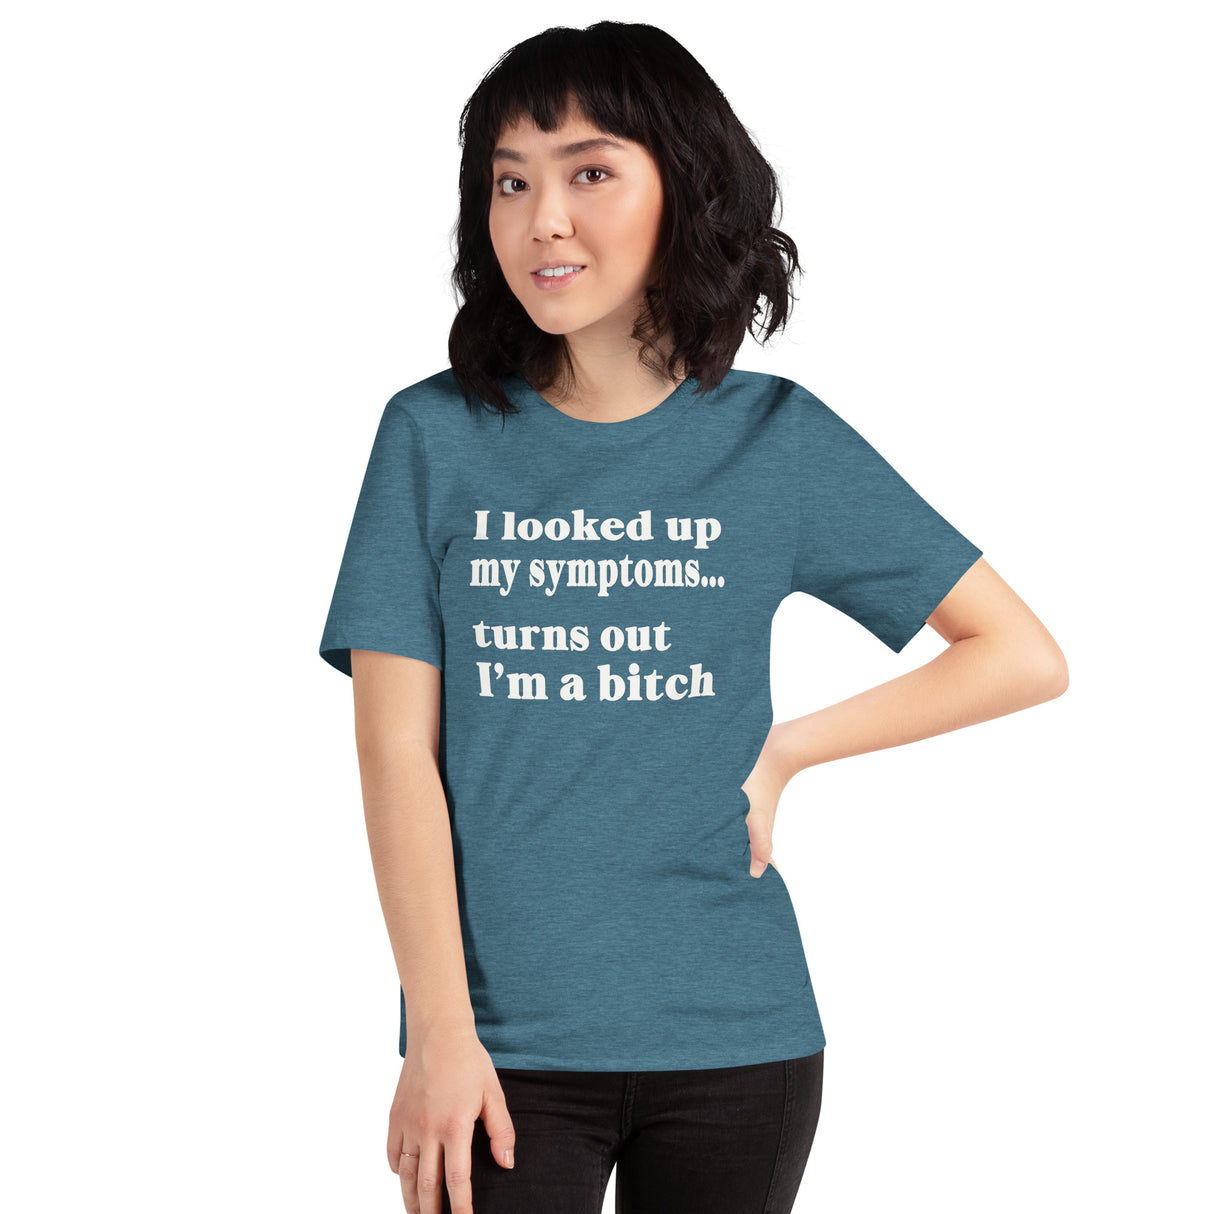 I Looked Up My Symptoms Turns Out I'm a Bitch Shirt